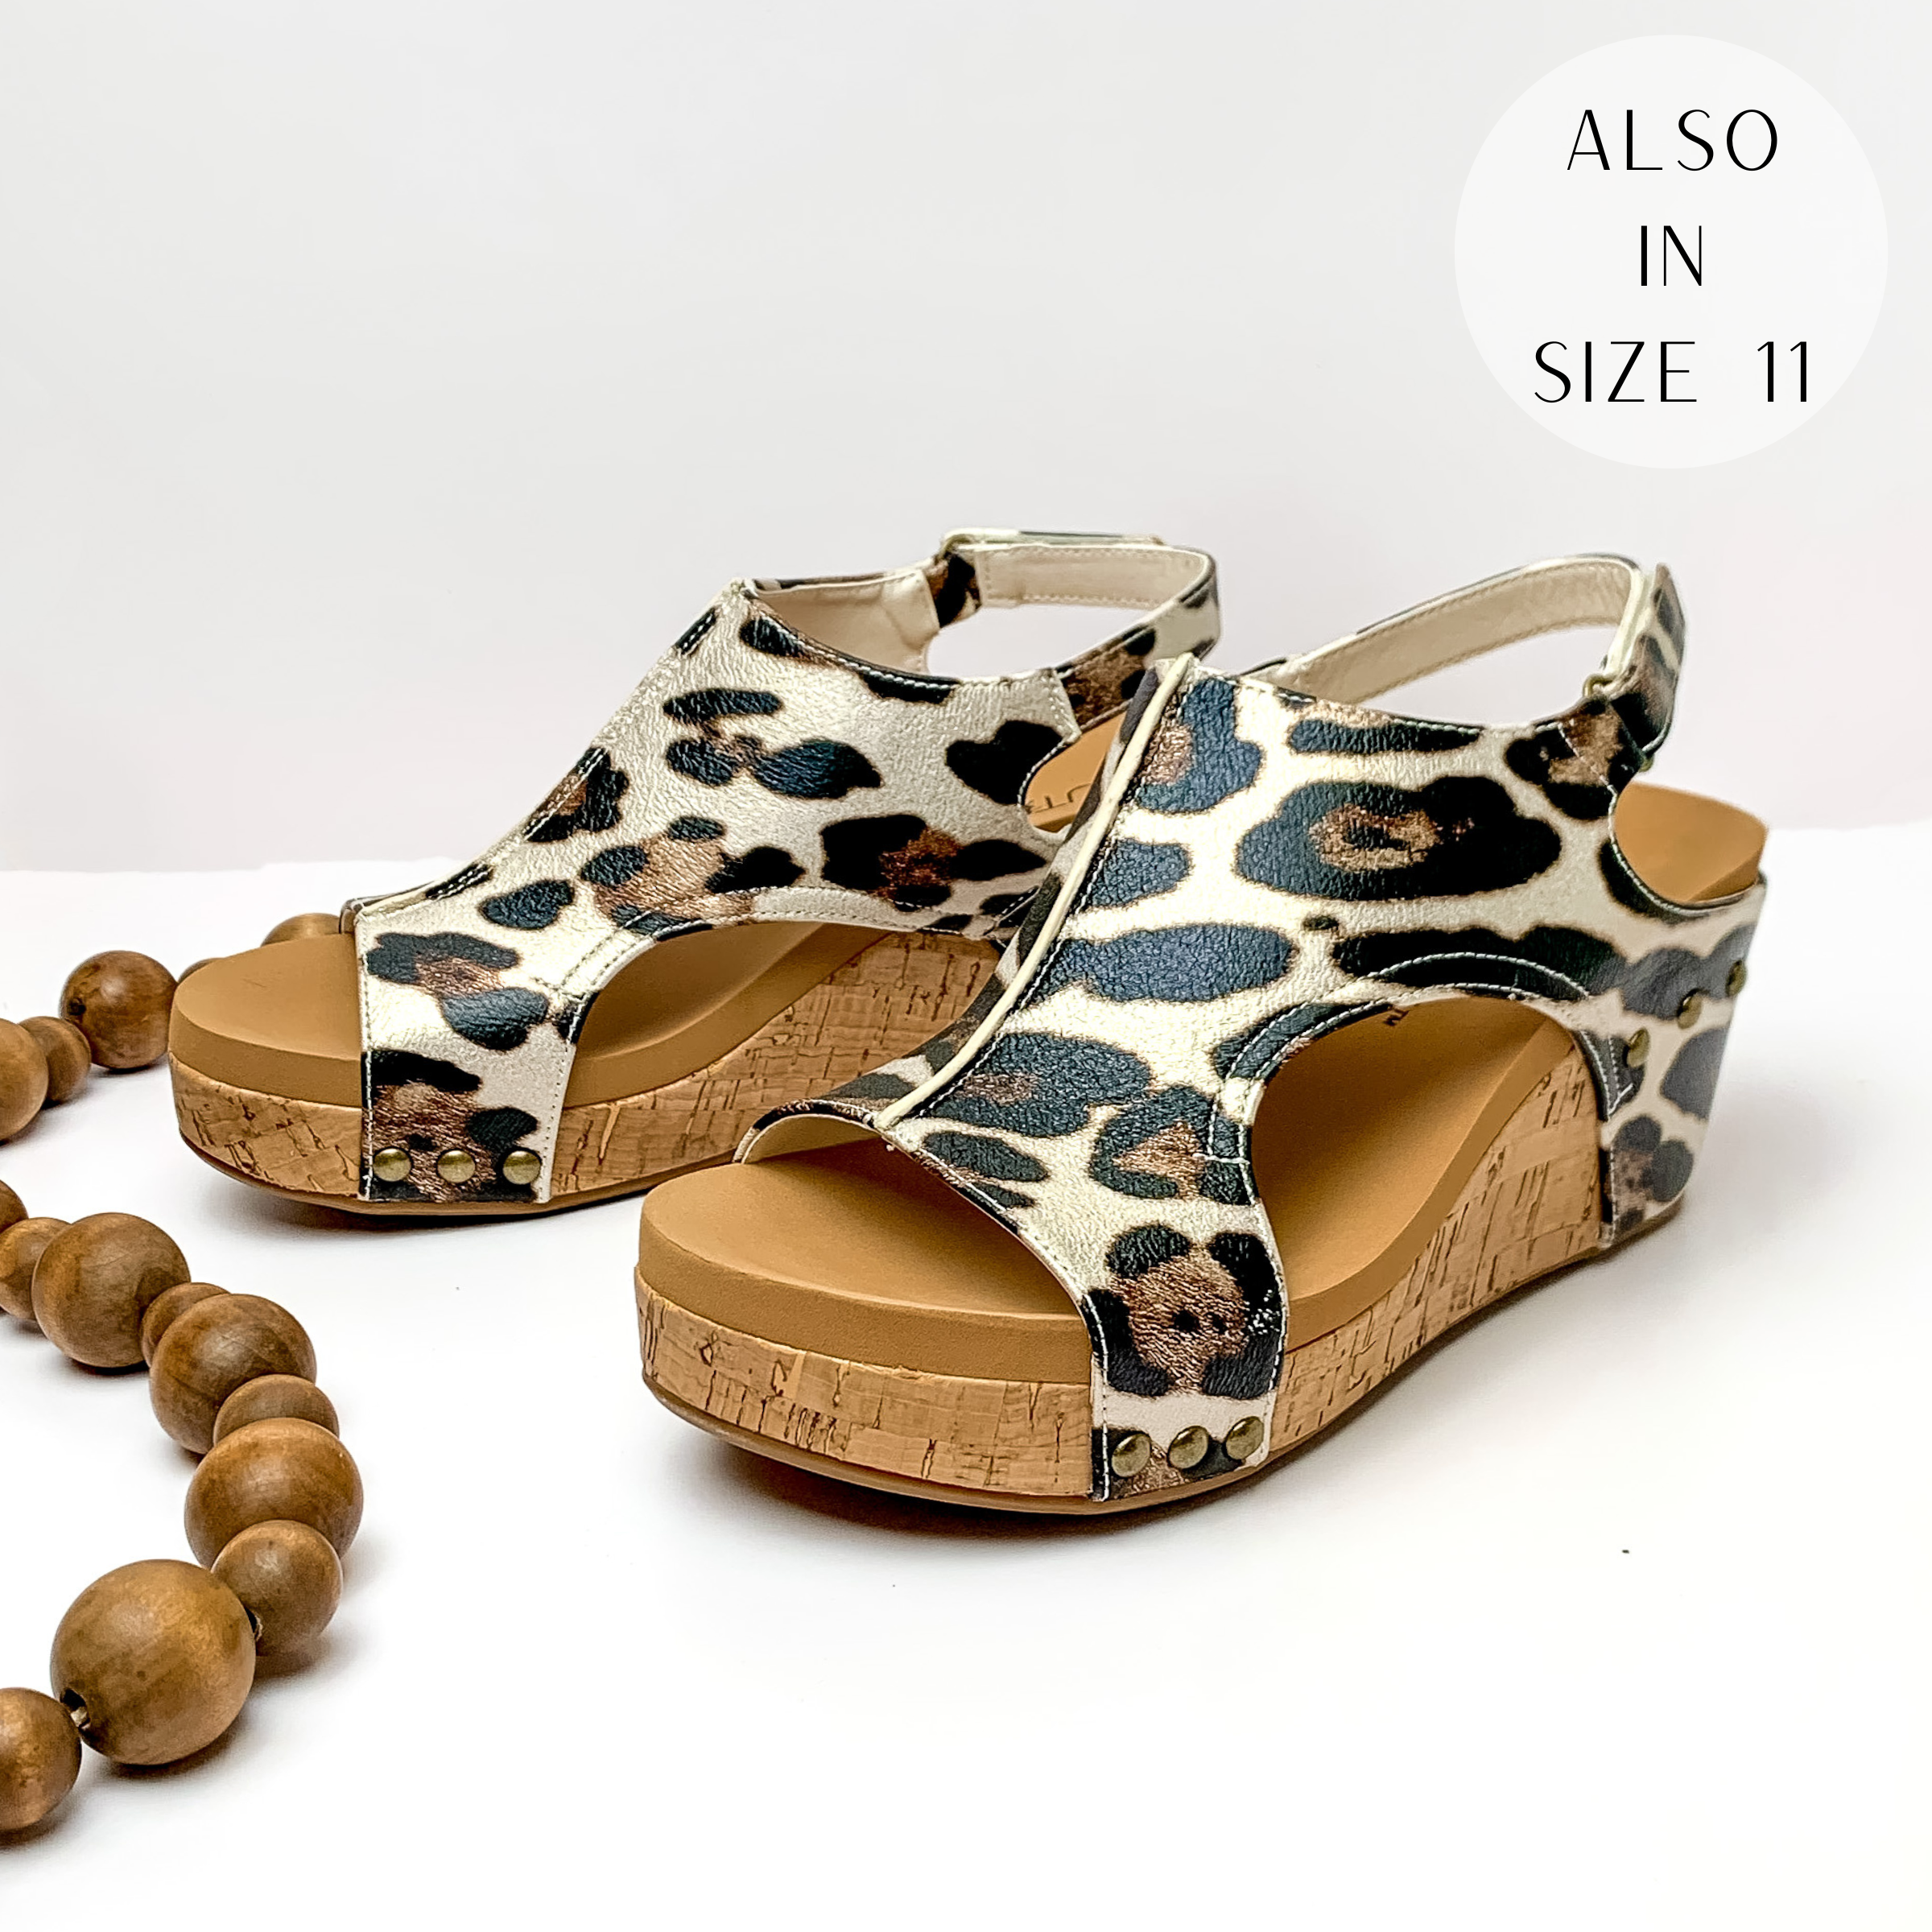 Cork wedges with a ivory color upper with a black and brown leopard print and bronze studs connecting the upper to the wedge. These wedges also include a velco strap. These wedges are pictured on a white background with brown beads on the left side of the wedges.